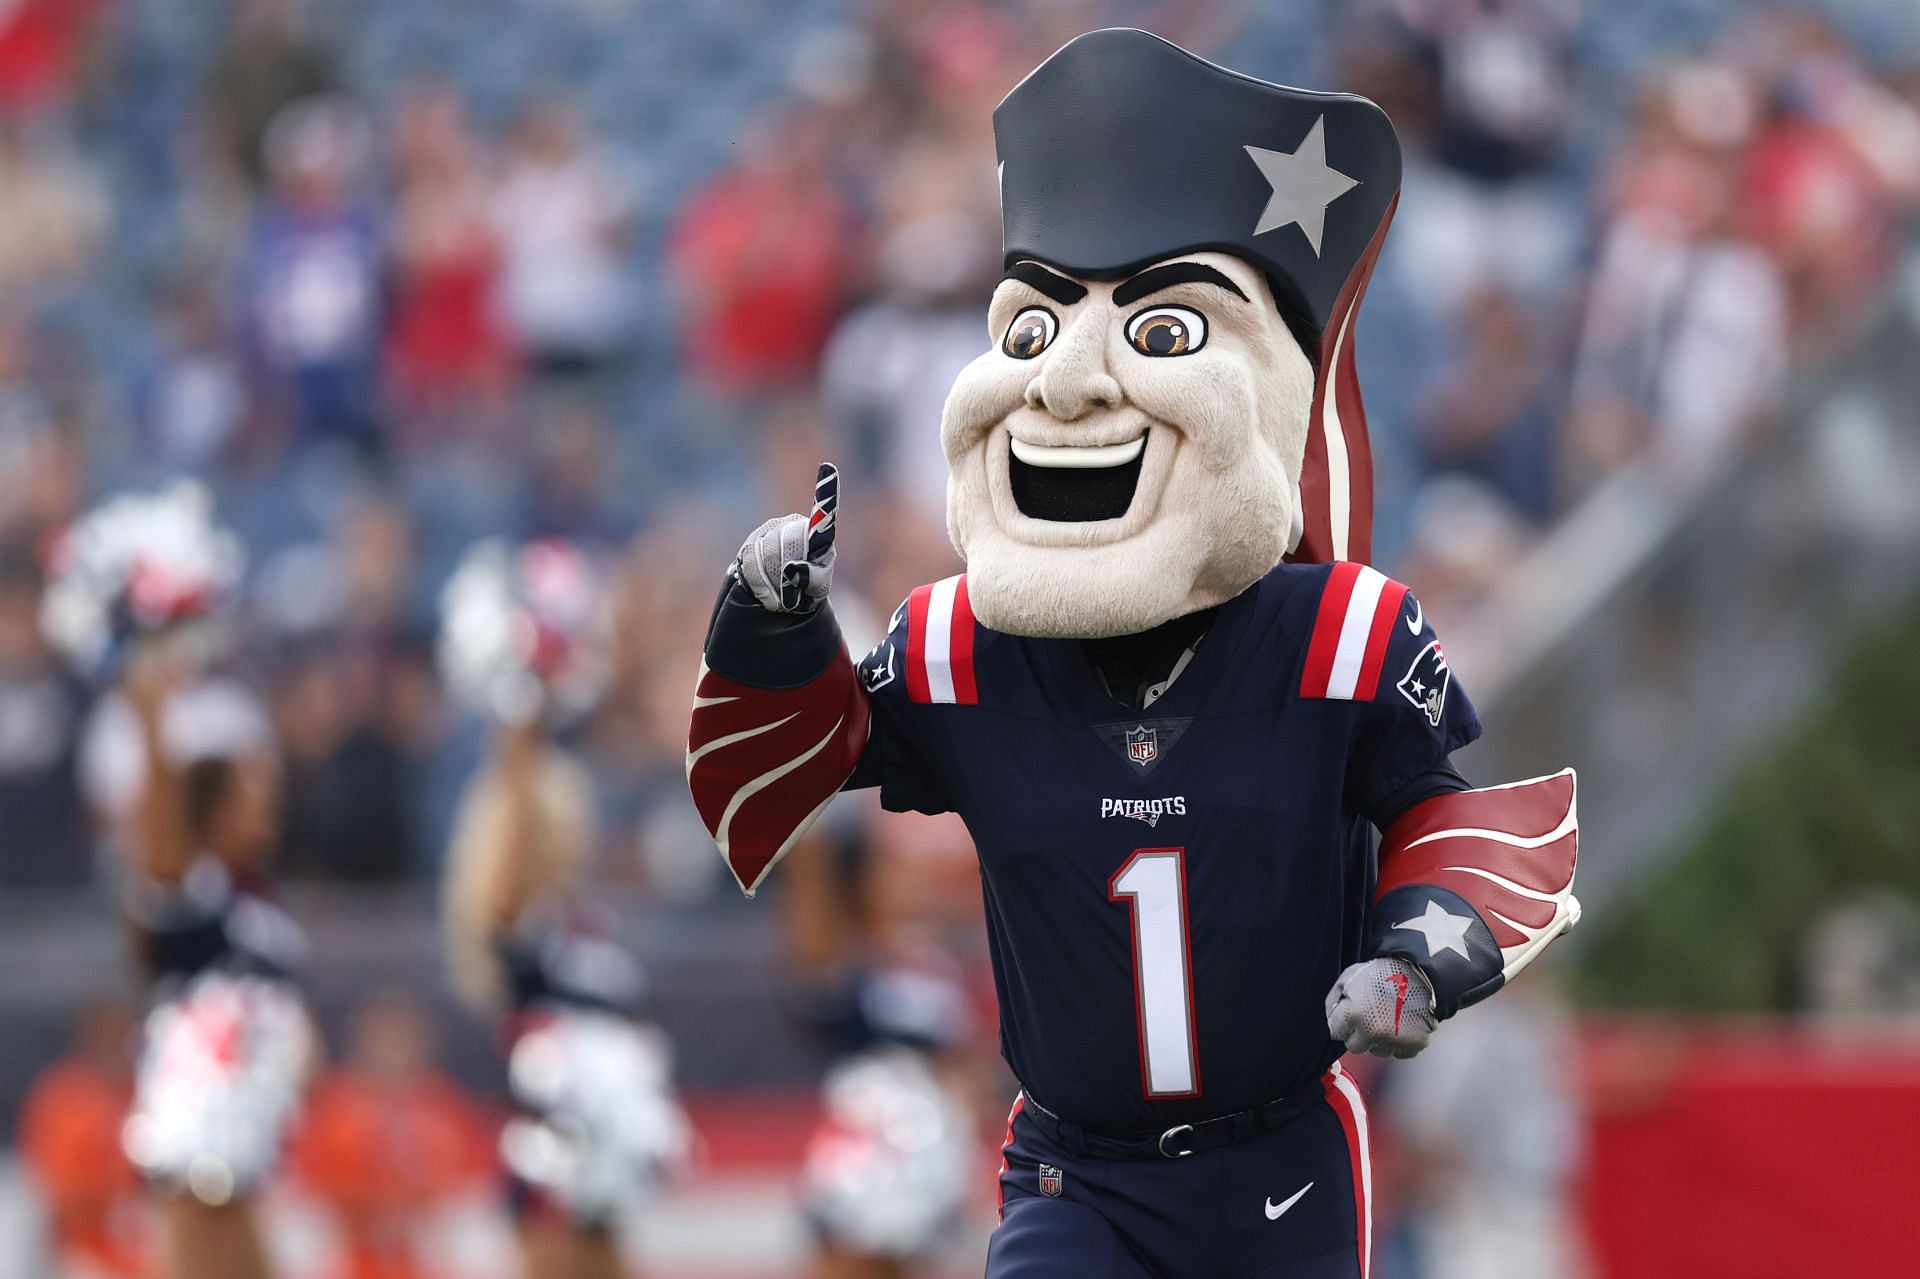 The New England Patriots and their mascot are ready to get back to a Super Bowl